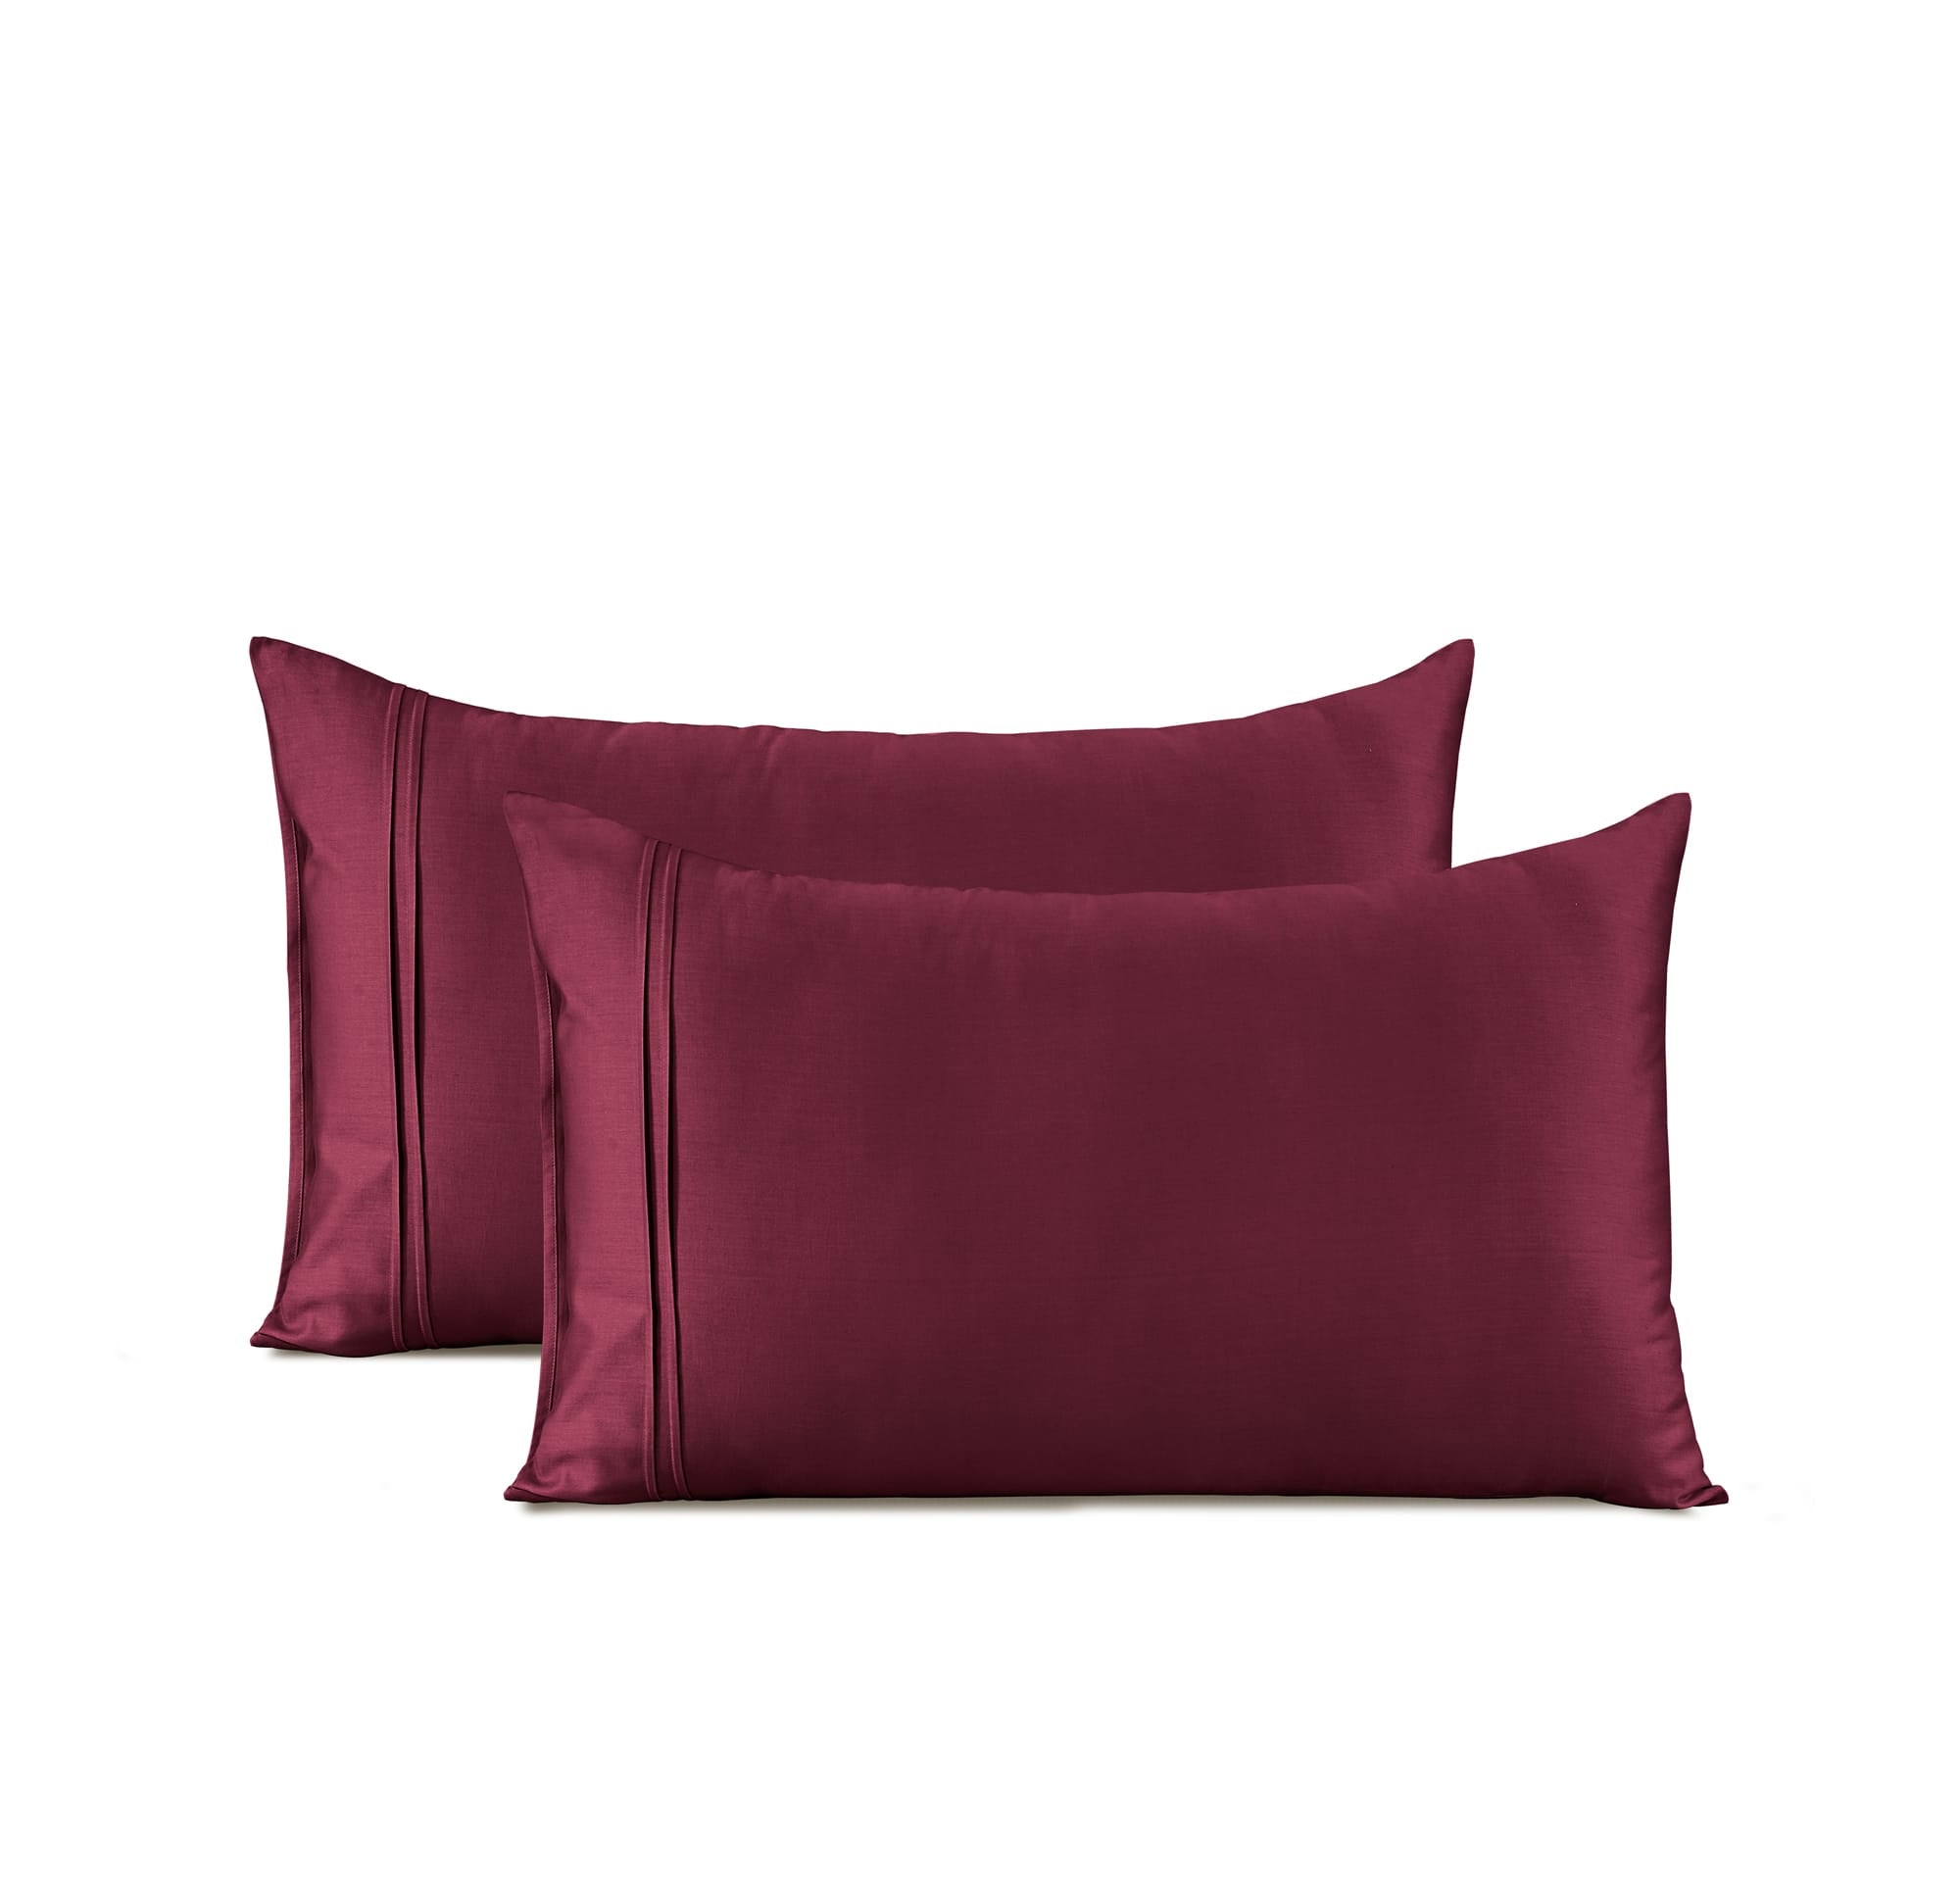 Soft Burgundy 400 TC Cotton Satin Designer Pillow Covers Online In India